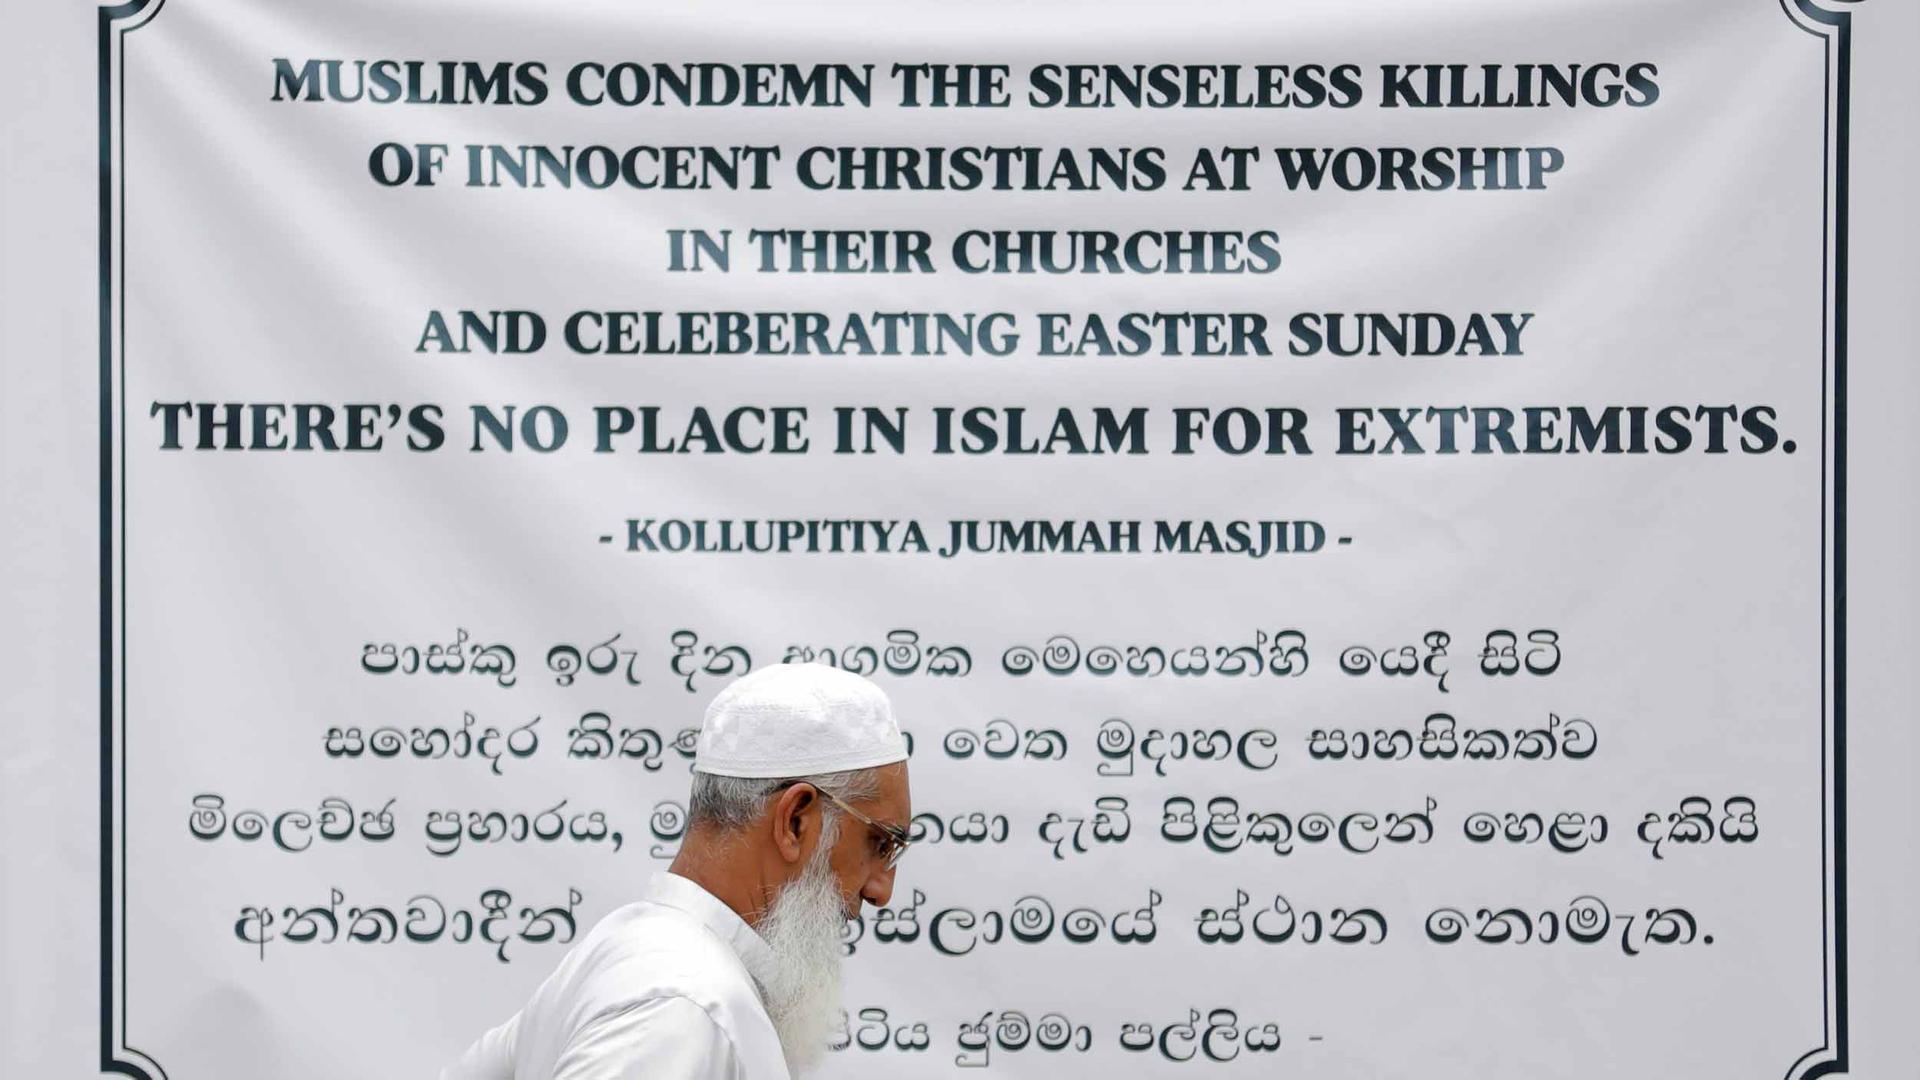 A man walks by a large banner that reads "Muslims condemn the senseless killings of innocent Christians at worship in their churches and celebrating Easter Sunday. There's no place in Islam for extremists."